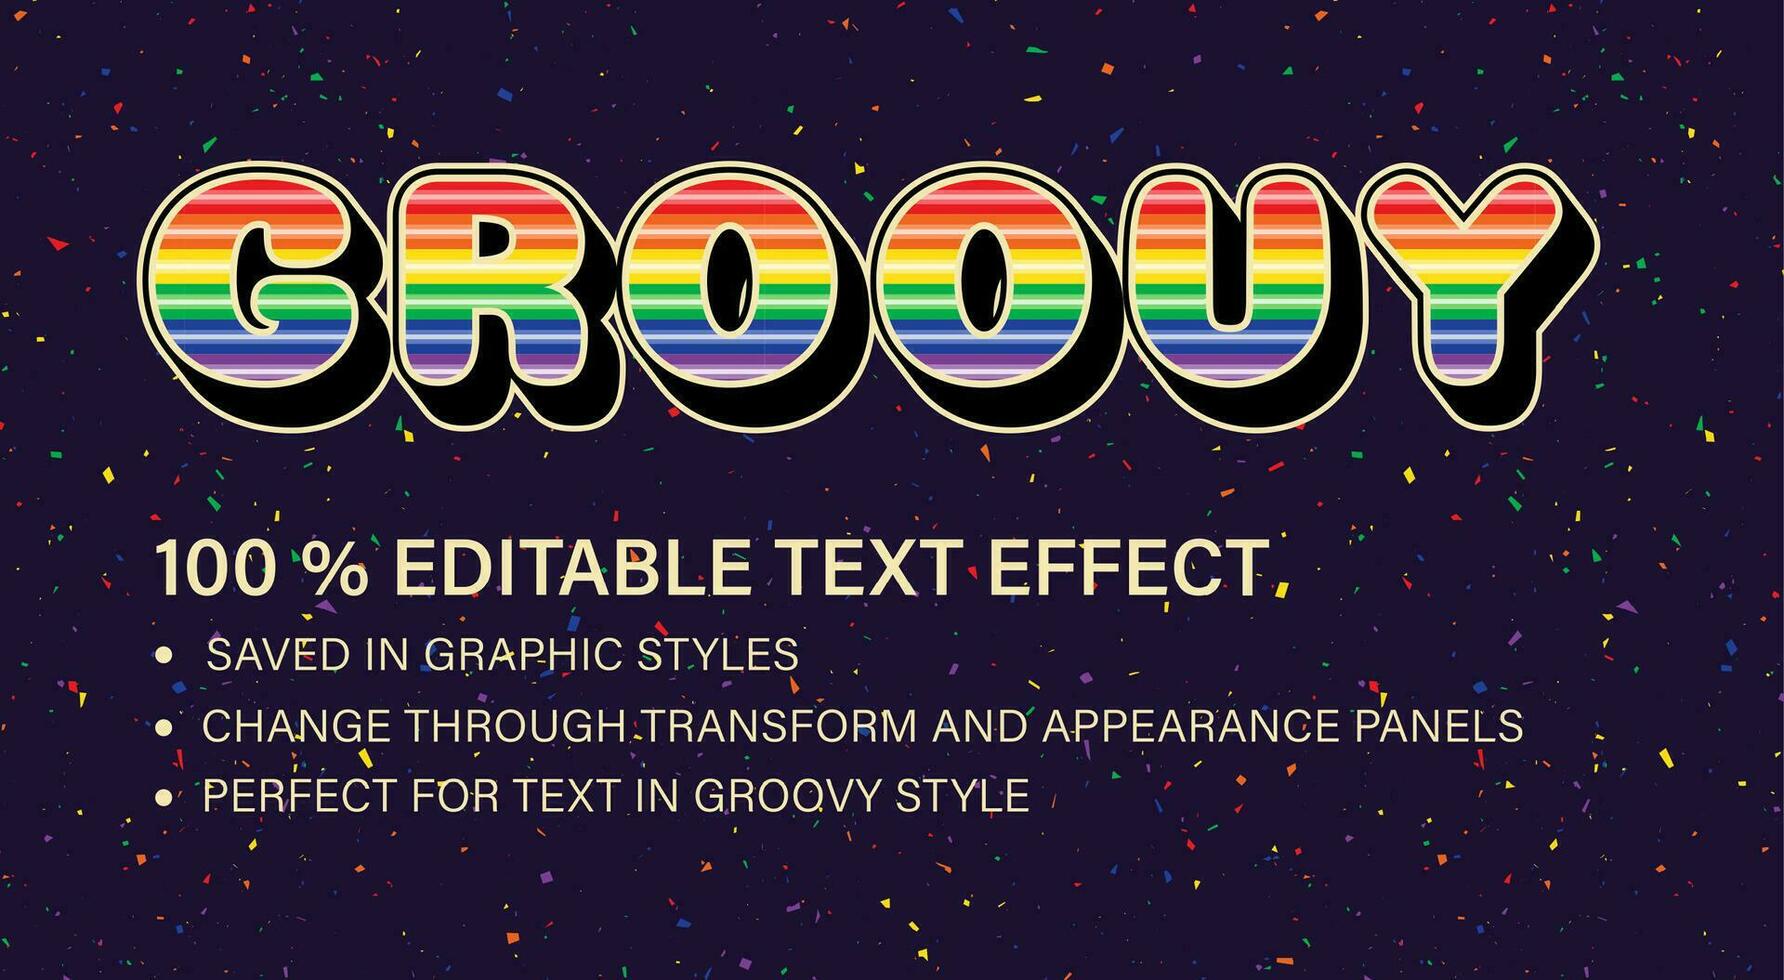 Groovy editable text effect in vintage style. Volumetric letters with rainbow stripes. Retro typographic graphic style. Good for hippie style of 60s, 70s For poster, header design vector